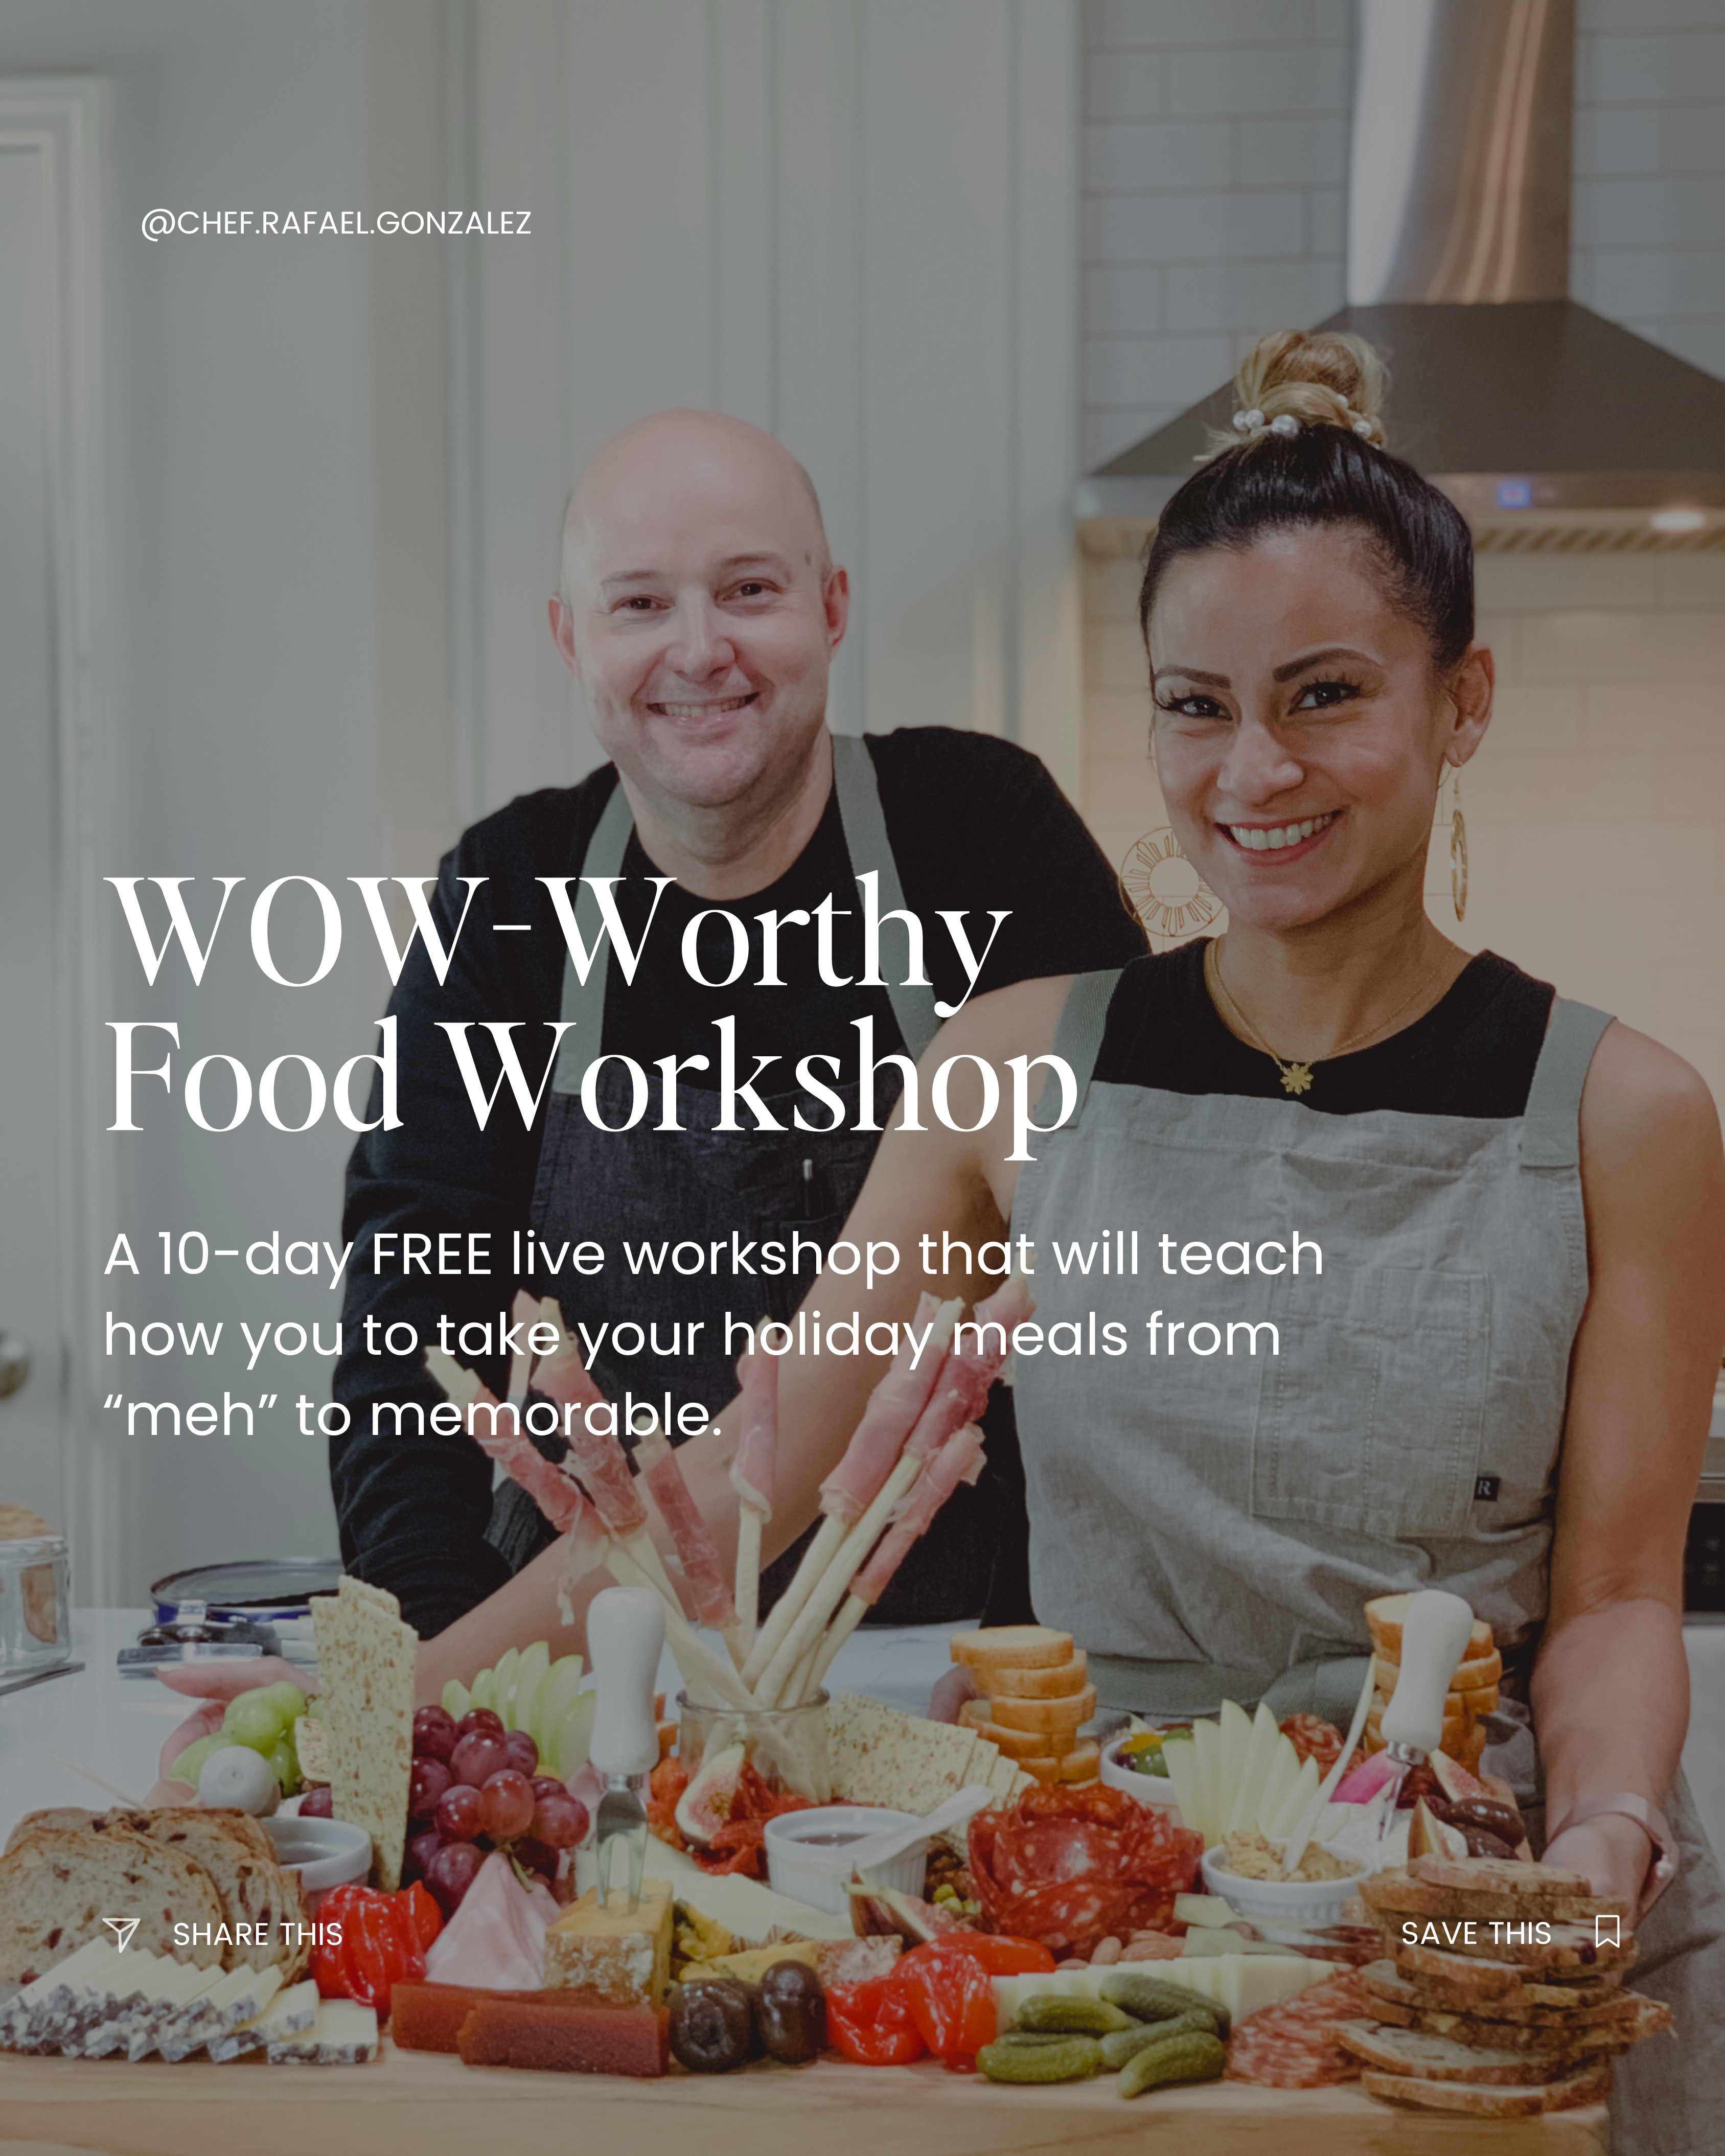 Chef Rafael and event planner wife Toni in Wow Worthy Food Workshop sharing the joy of cooking and art of entertaining